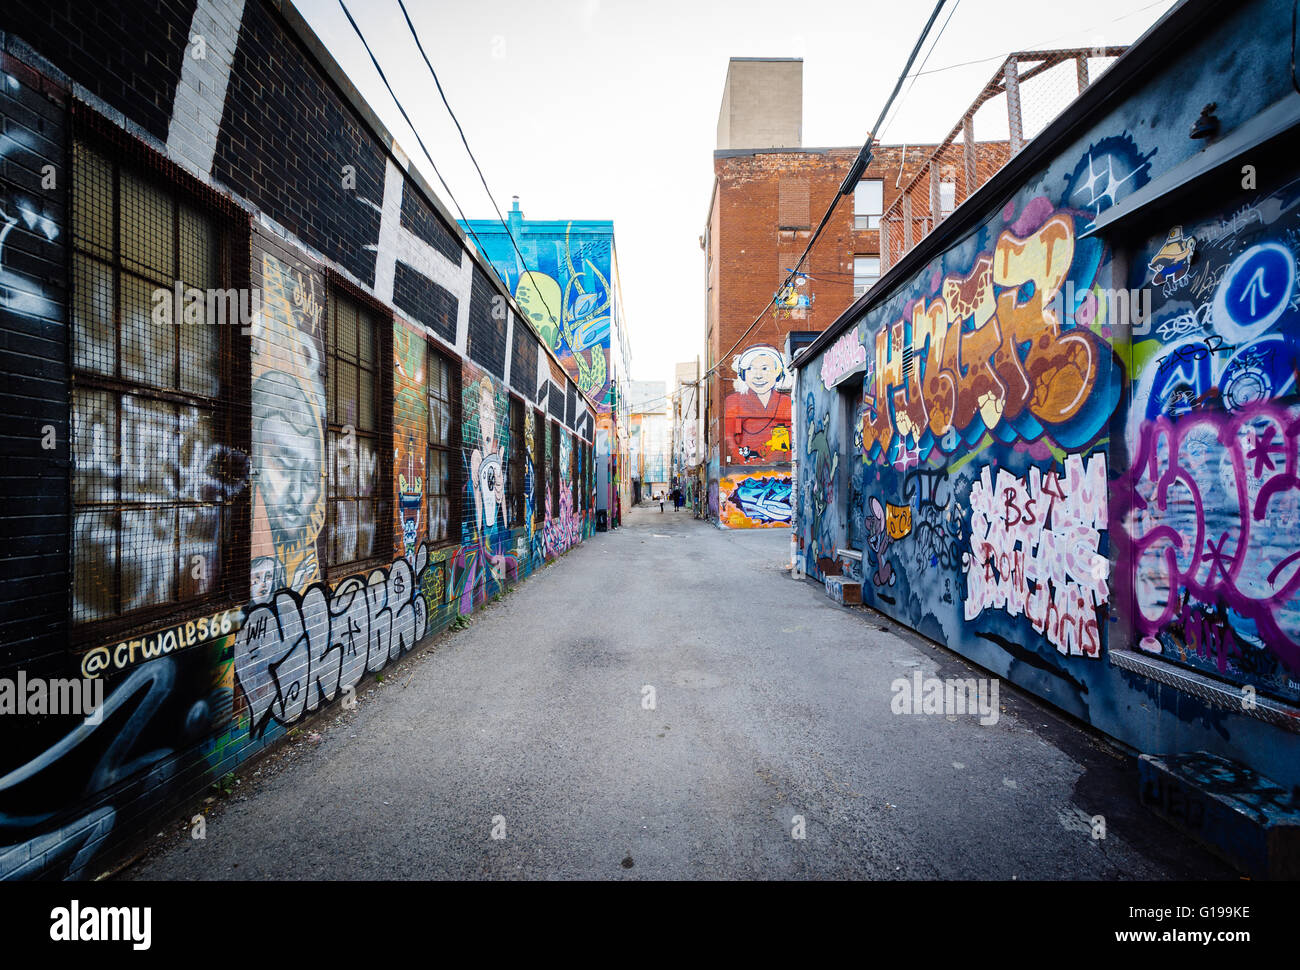 Street art in Graffiti Alley, in the Fashion District of Toronto, Ontario. Stock Photo